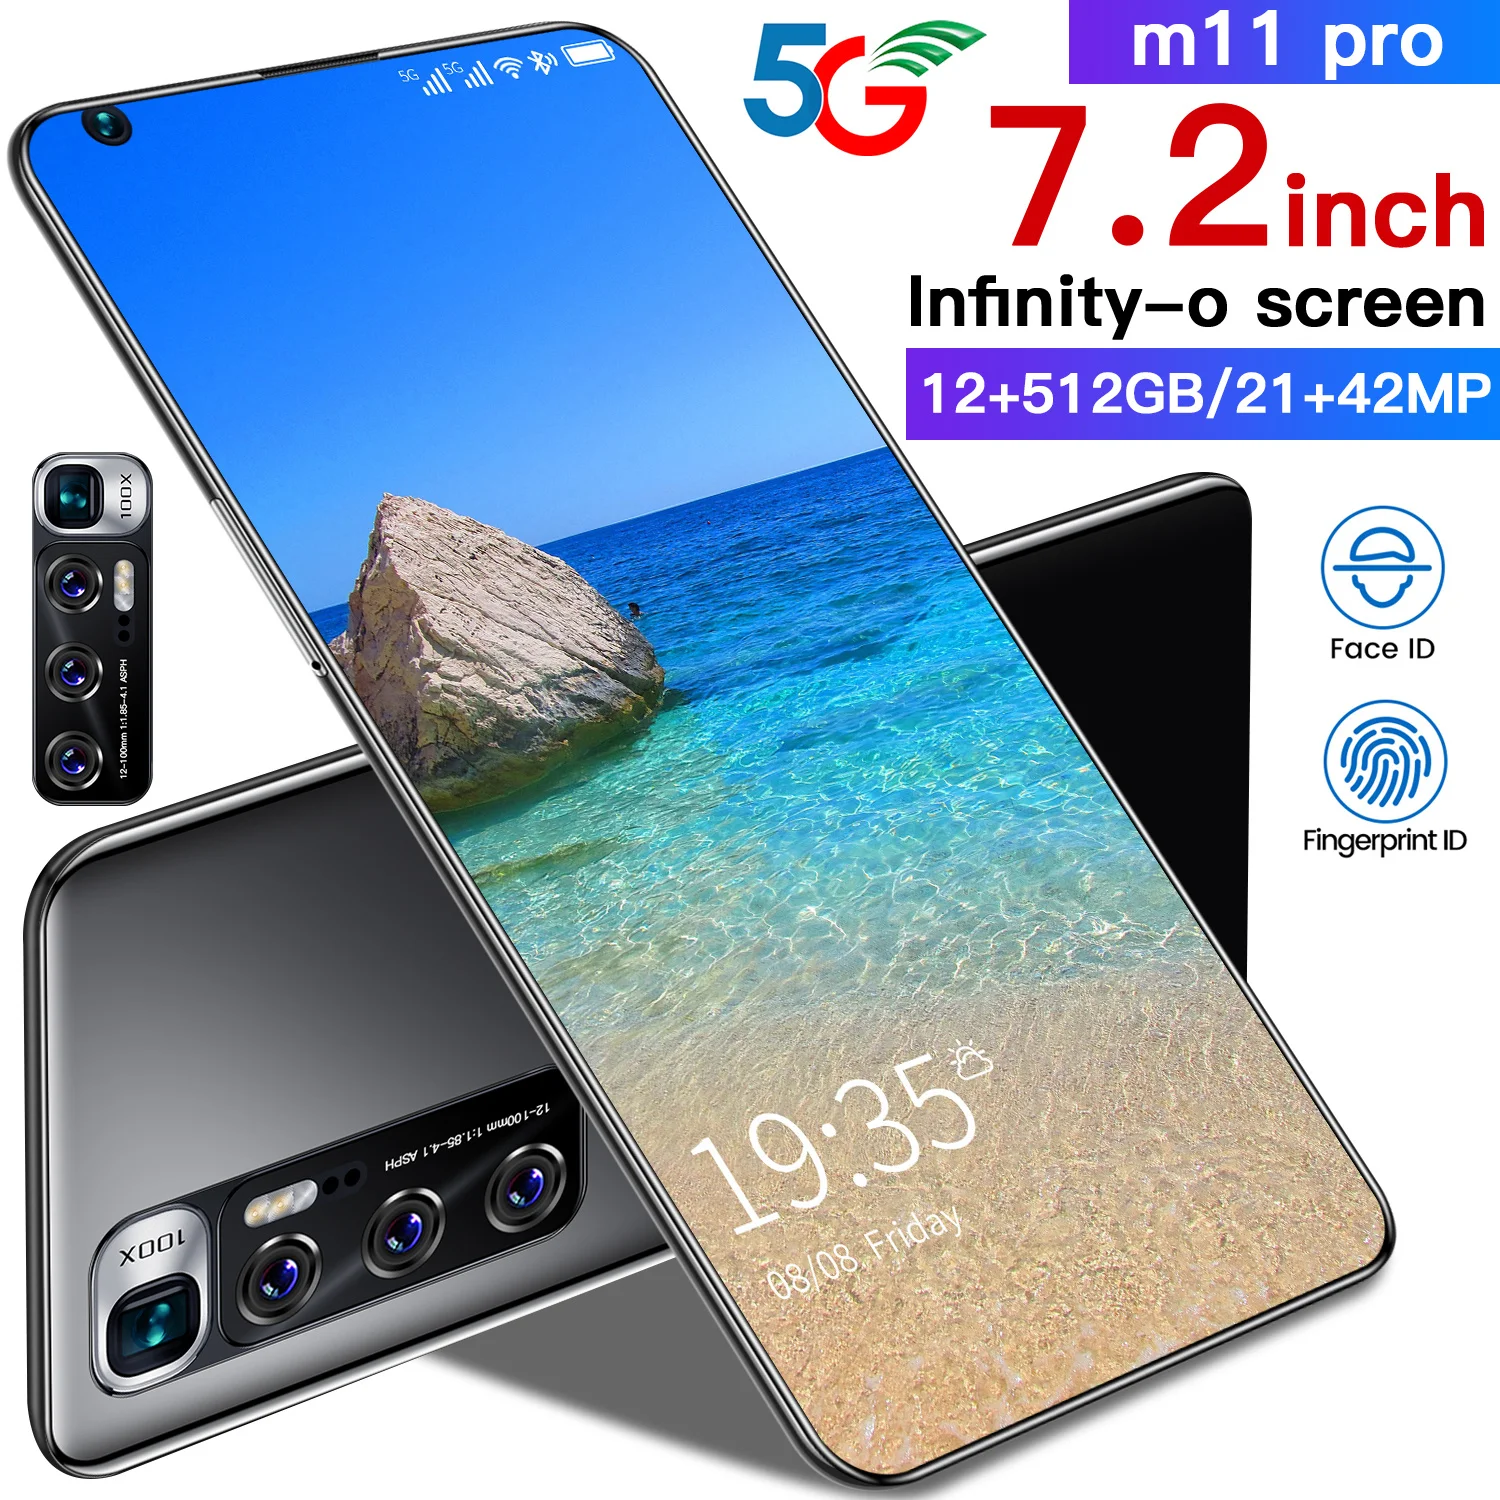 extract rechtop geweer Android Smartphone M11pro 7.2inch Infinity-o Screen Mobile Phone Dual Sim  Wifi Camera Gps 5g Mobile Phone 12g +512gb - Buy Android Smartphone,Android  Phones 4g Lte Smartphone,China Mobile Phone 4g Android Smartphone Product